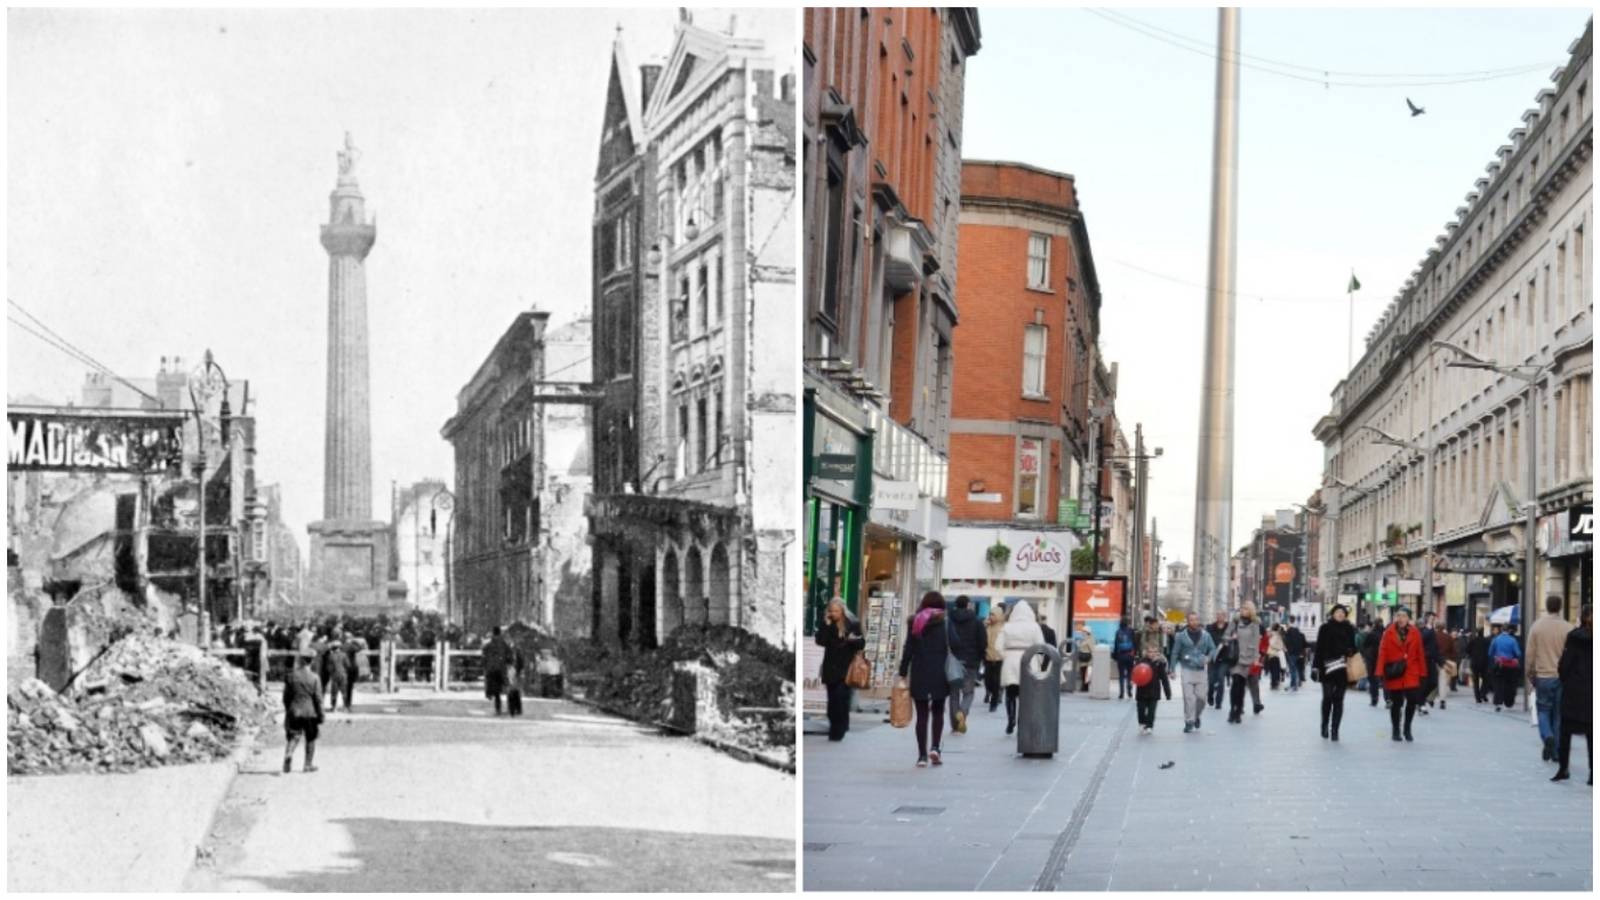 Henry Street: In 1916, as now, this was street of shops. Fifty-three buildings were burned here during the Rising